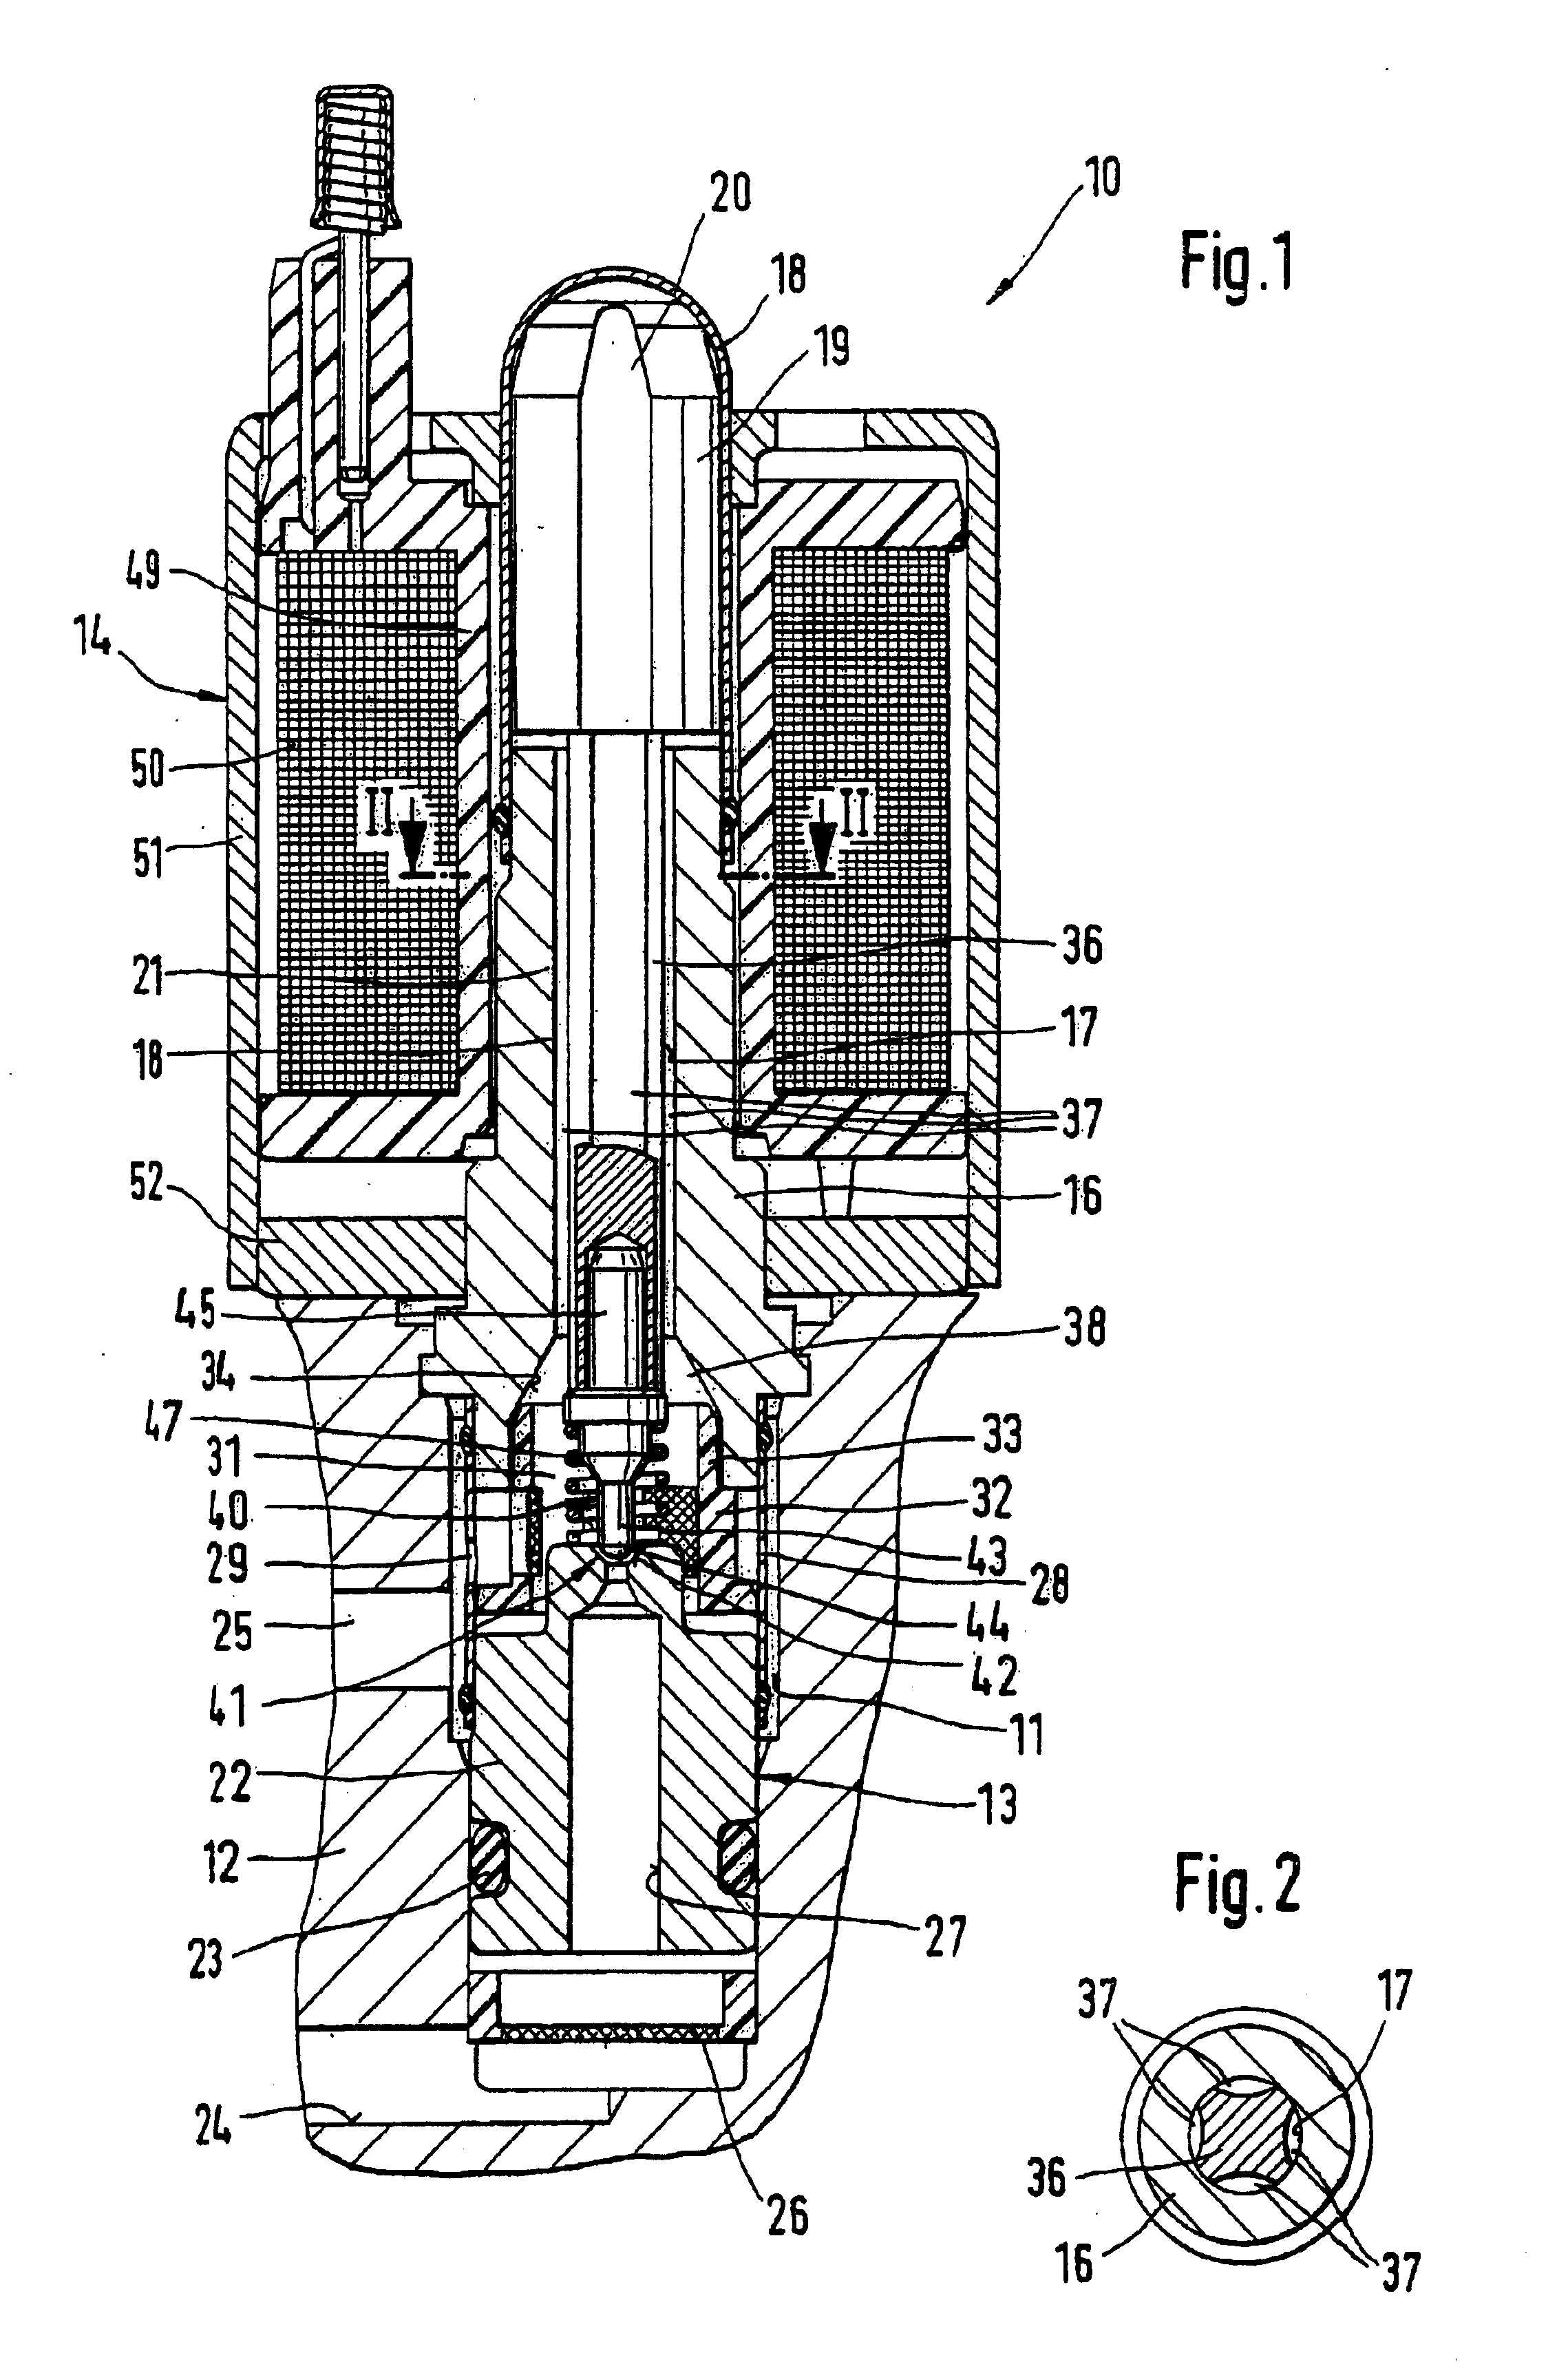 Electromagnetically actuated valve, especially for hydraulic braking systems of motor vehicles